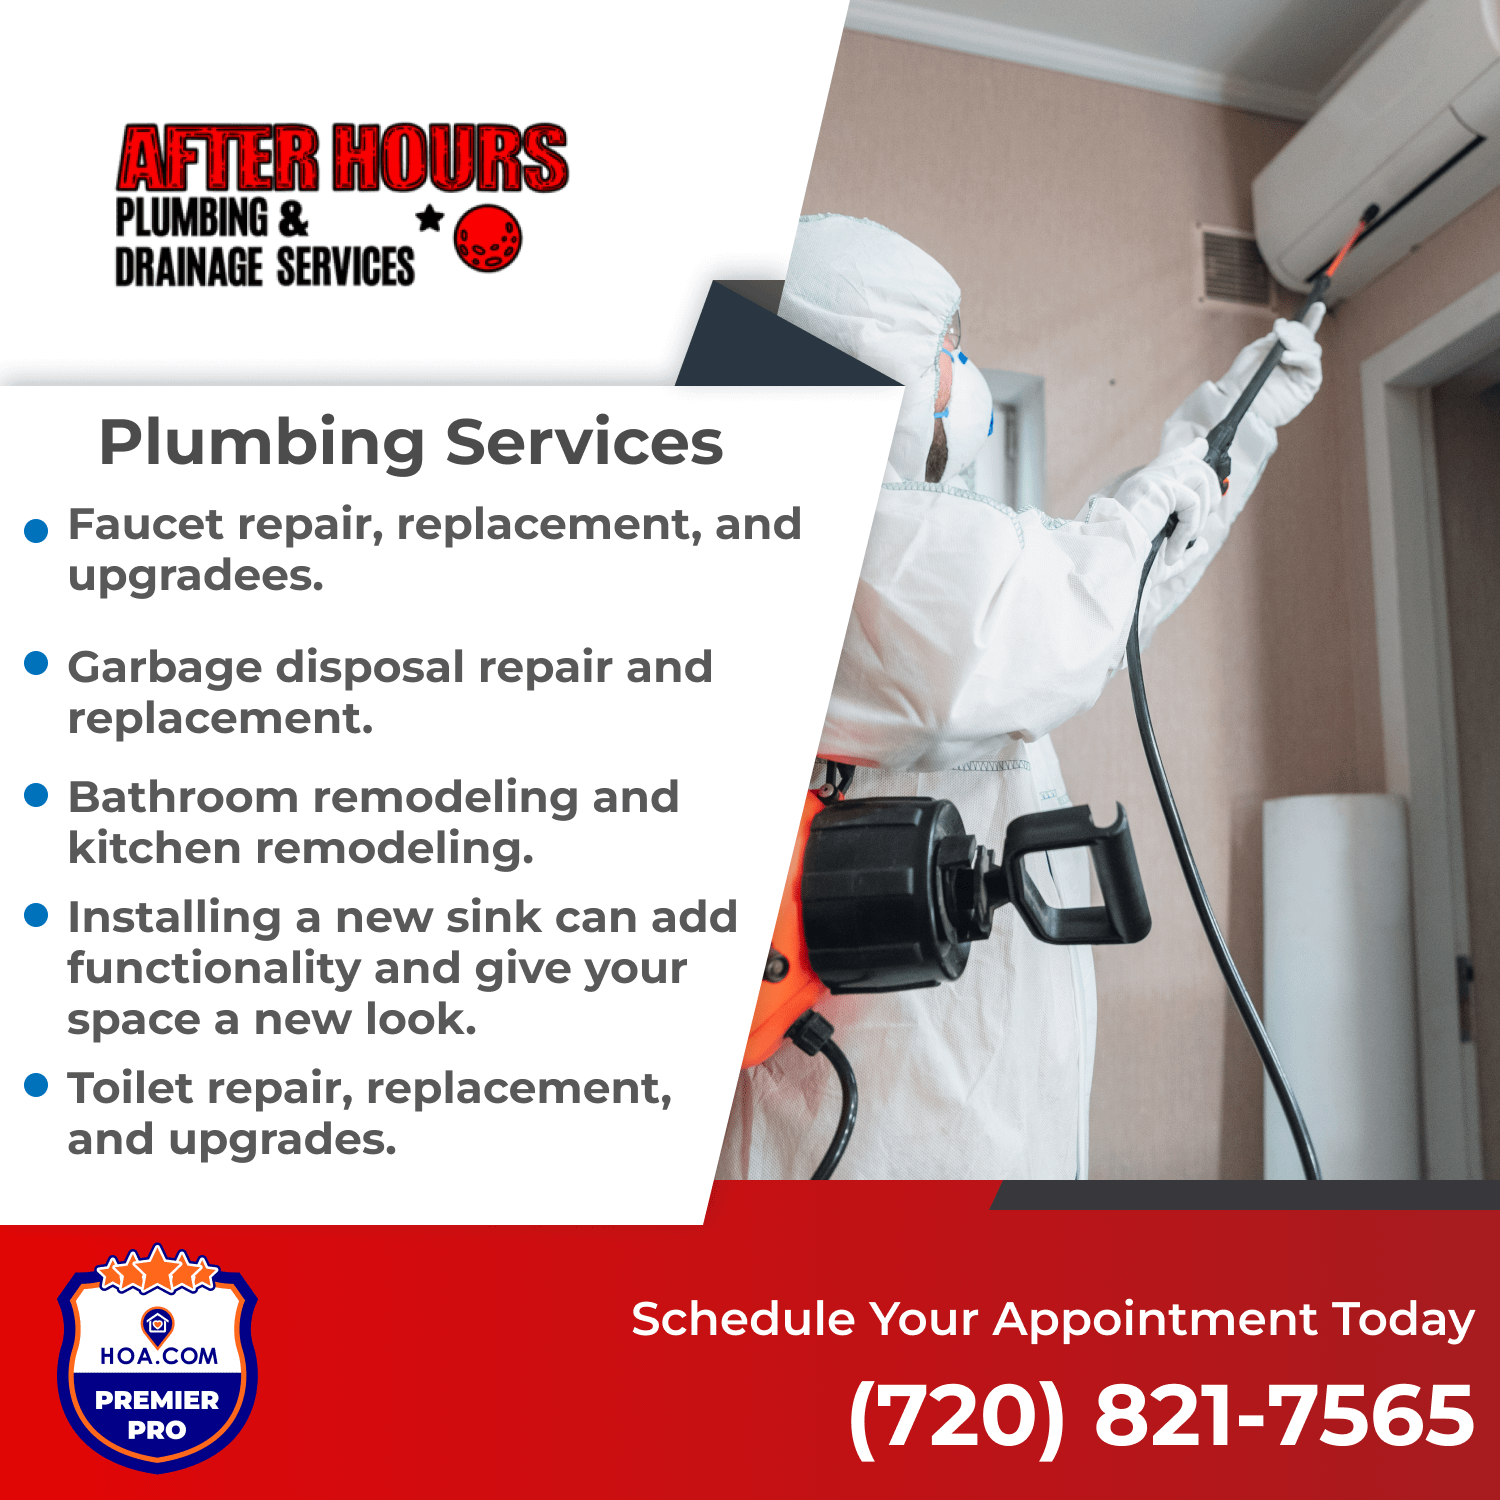 After Hours Plumbing Services